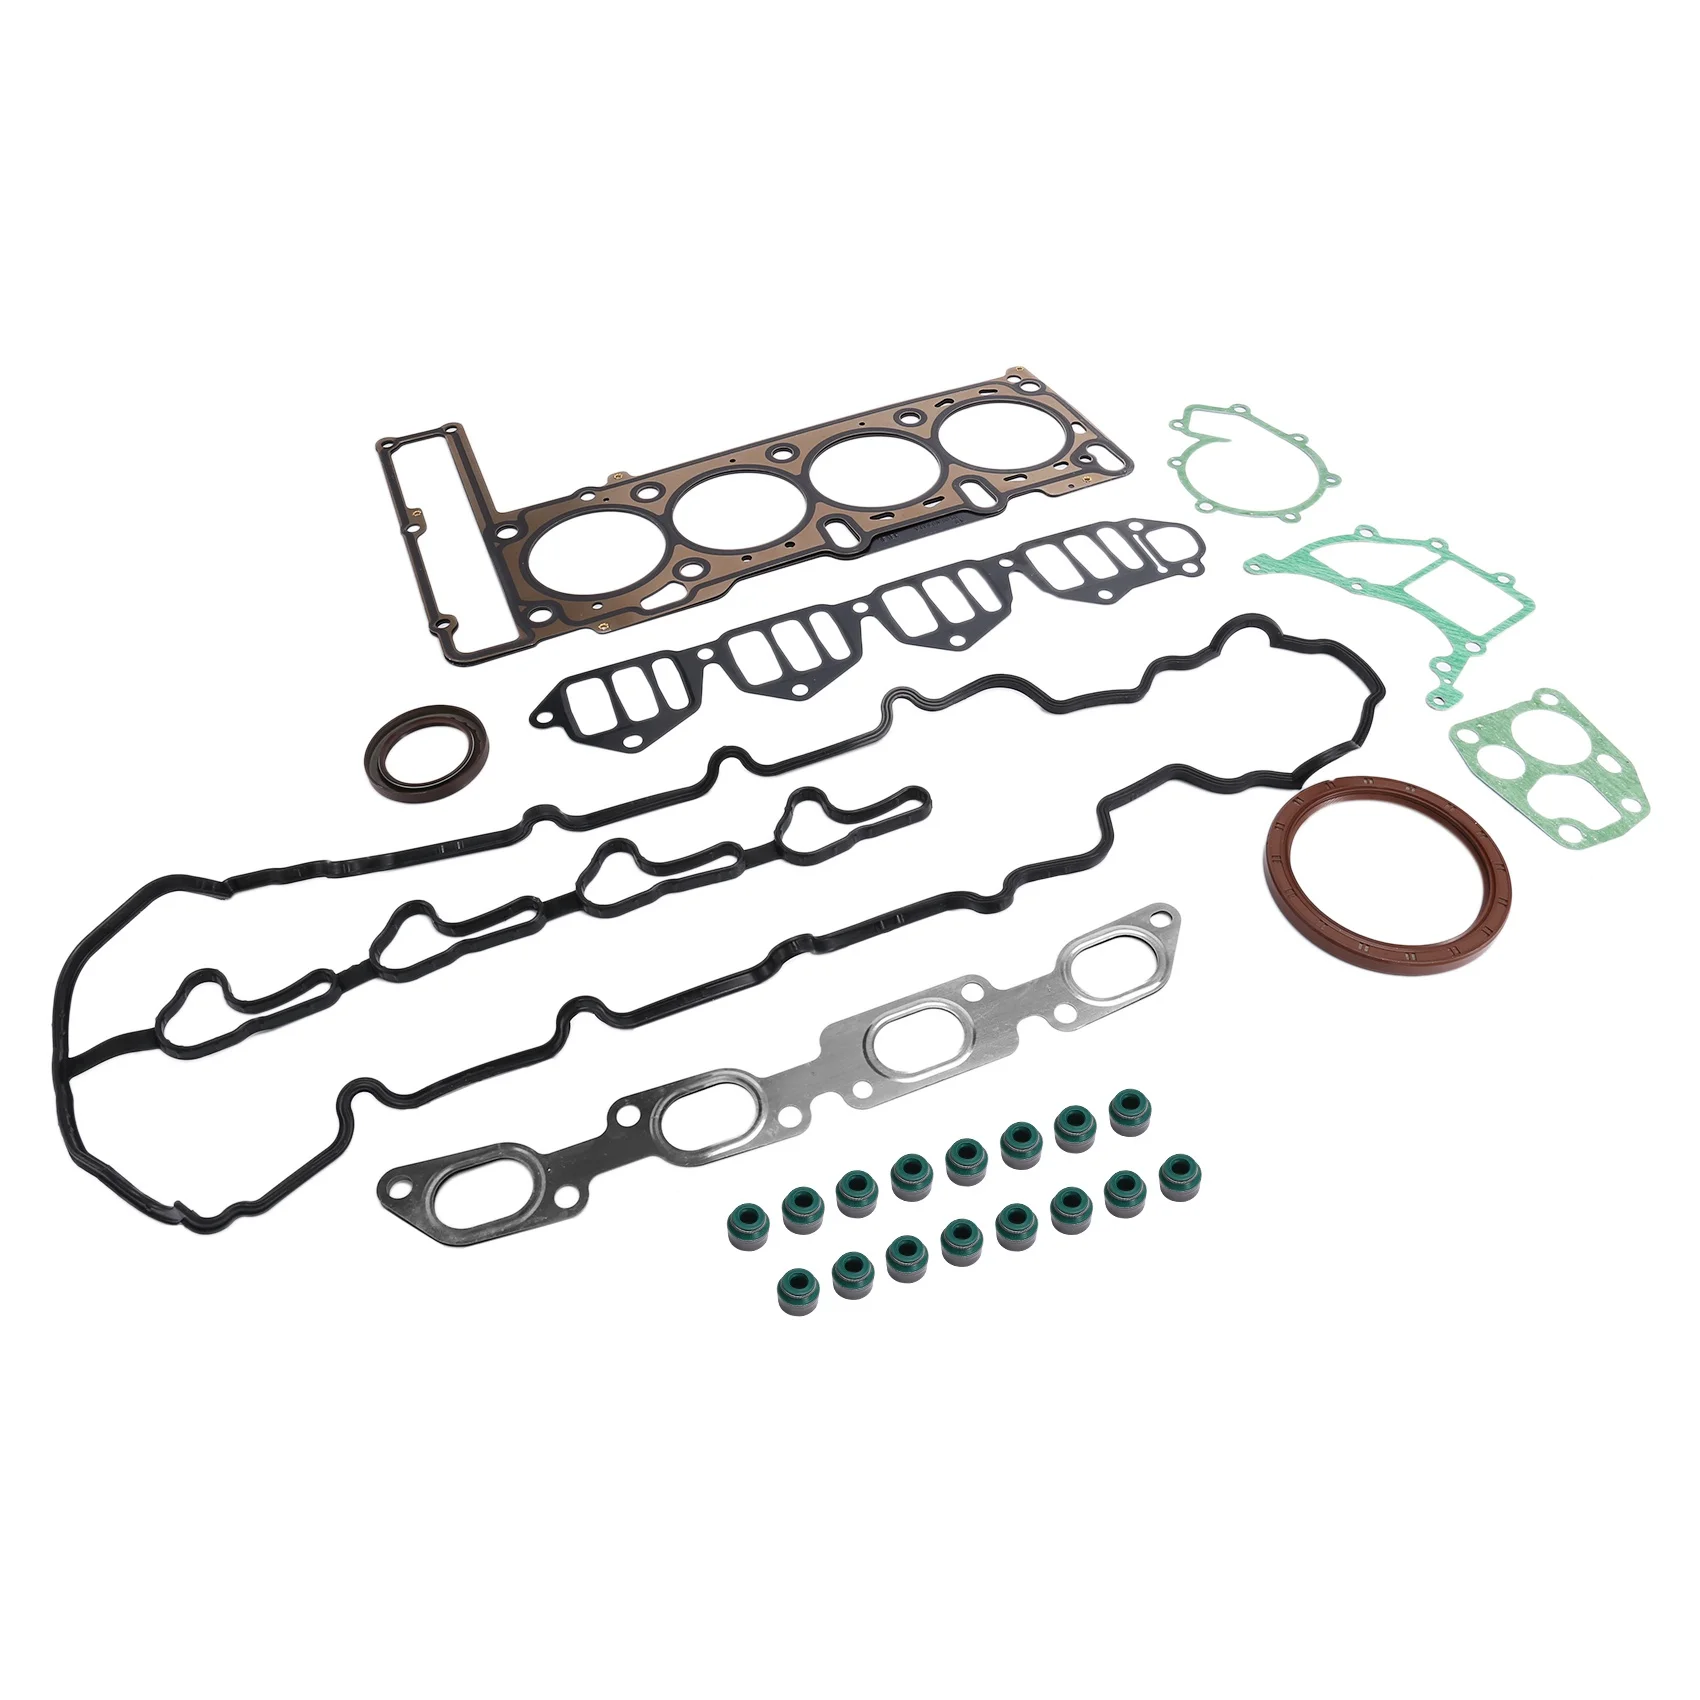 

Car Engine Overhual Gasket Kit Rebuilding Kits for Ssangyong Actyon Kyron 2.0 Rexton +D20DT 6640100001